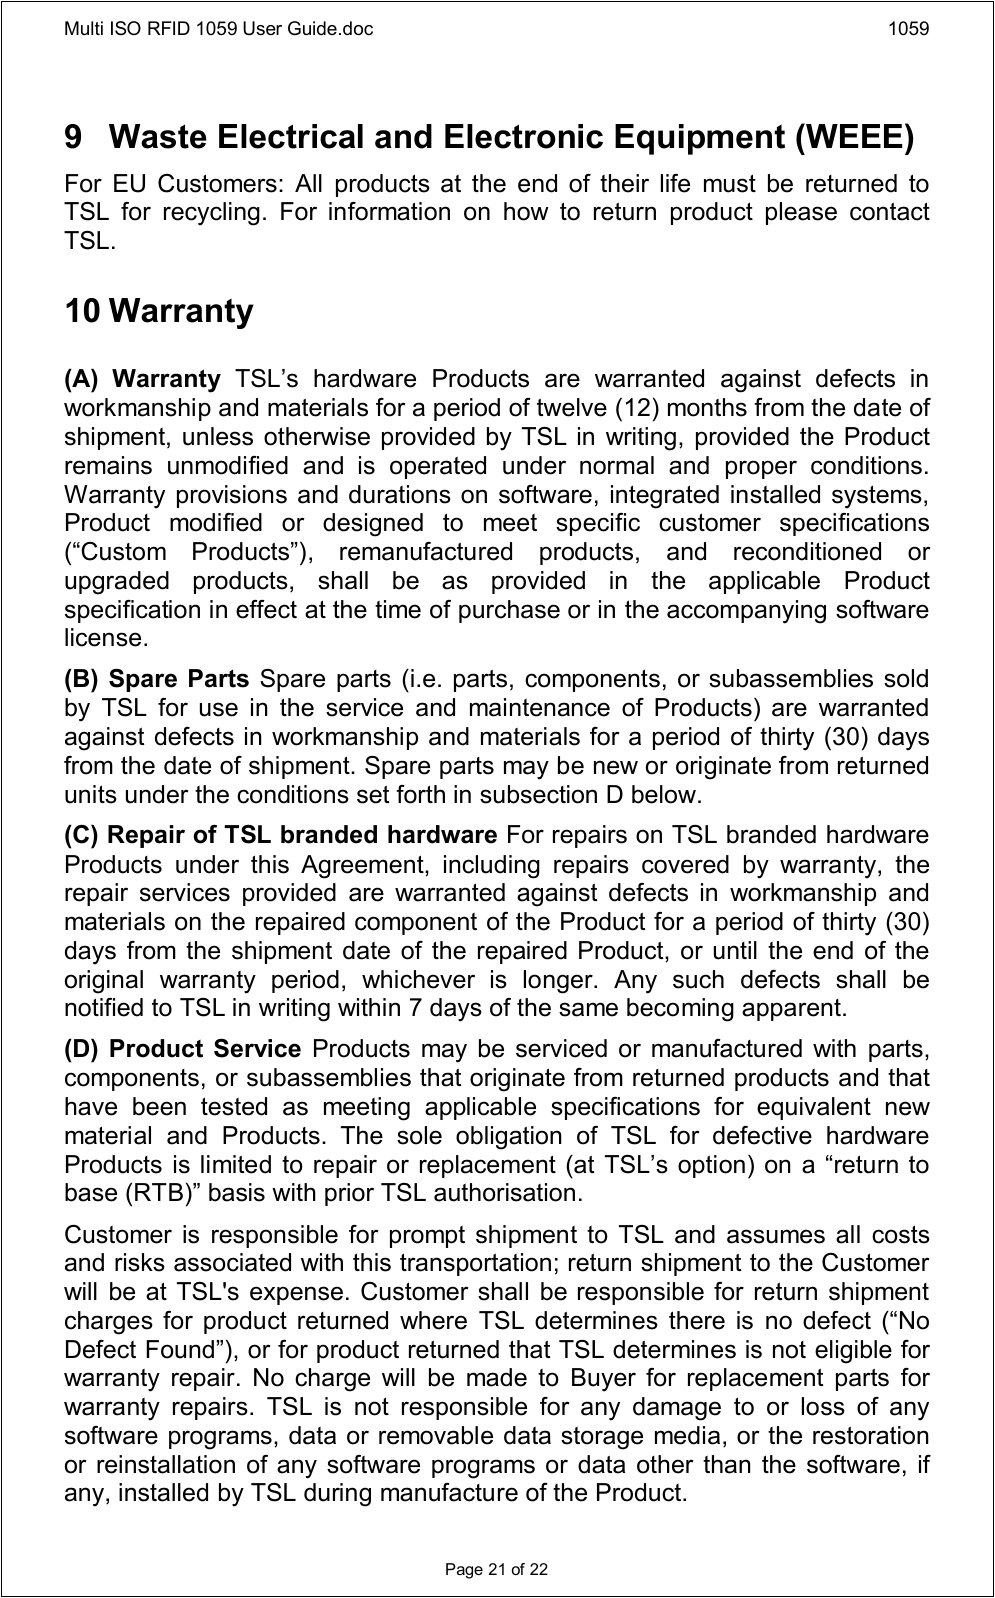 Multi ISO RFID 1059 User Guide.doc 1059Page 21 of 229 Waste Electrical and Electronic Equipment (WEEE)For  EU  Customers: All  products at the  end of  their  life  must  be  returned  to TSL  for  recycling.  For  information  on  how  to  return  product  please  contact TSL.10 Warranty(A)  Warranty  TSL’s  hardware  Products  are  warranted  against  defects  in workmanship and materials for a period of twelve (12) months from the date of shipment, unless otherwise provided by TSL in writing, provided the Product remains  unmodified  and  is  operated  under  normal  and  proper  conditions. Warranty provisions and durations on software, integrated installed systems, Product  modified  or  designed  to  meet  specific  customer  specifications (“Custom  Products”),  remanufactured  products,  and  reconditioned  or upgraded  products,  shall  be  as  provided  in  the  applicable  Product specification in effect at the time of purchase or in the accompanying software license.(B) Spare Parts Spare parts (i.e. parts, components, or subassemblies sold by  TSL  for  use  in  the  service  and  maintenance  of  Products)  are  warranted against defects in workmanship and materials for a period of thirty (30) days from the date of shipment. Spare parts may be new or originate from returned units under the conditions set forth in subsection D below.(C) Repair of TSL branded hardware For repairs on TSL branded hardware Products  under  this  Agreement,  including  repairs  covered  by  warranty,  the repair  services  provided  are  warranted  against  defects  in  workmanship  and materials on the repaired component of the Product for a period of thirty (30) days from the  shipment date of the repaired Product, or until the end of the original  warranty  period,  whichever  is  longer.  Any  such  defects  shall  be notified to TSL in writing within 7 days of the same becoming apparent.(D) Product Service  Products may  be serviced or manufactured with  parts, components, or subassemblies that originate from returned products and that have  been  tested  as  meeting  applicable  specifications  for  equivalent  new material  and  Products.  The  sole  obligation  of  TSL  for  defective  hardware Products is limited to repair or replacement (at TSL’s option) on a “return to base (RTB)” basis with prior TSL authorisation.Customer  is responsible  for prompt  shipment to TSL  and assumes all  costs and risks associated with this transportation; return shipment to the Customer will be at TSL&apos;s expense. Customer shall be responsible for return shipment charges for  product returned where  TSL  determines  there is  no  defect (“No Defect Found”), or for product returned that TSL determines is not eligible for warranty  repair.  No  charge  will  be  made  to  Buyer  for  replacement  parts  for warranty  repairs.  TSL  is  not  responsible  for  any  damage  to  or  loss  of  any software programs, data or removable data storage media, or the restoration or reinstallation of any software programs or data other than the software, if any, installed by TSL during manufacture of the Product.